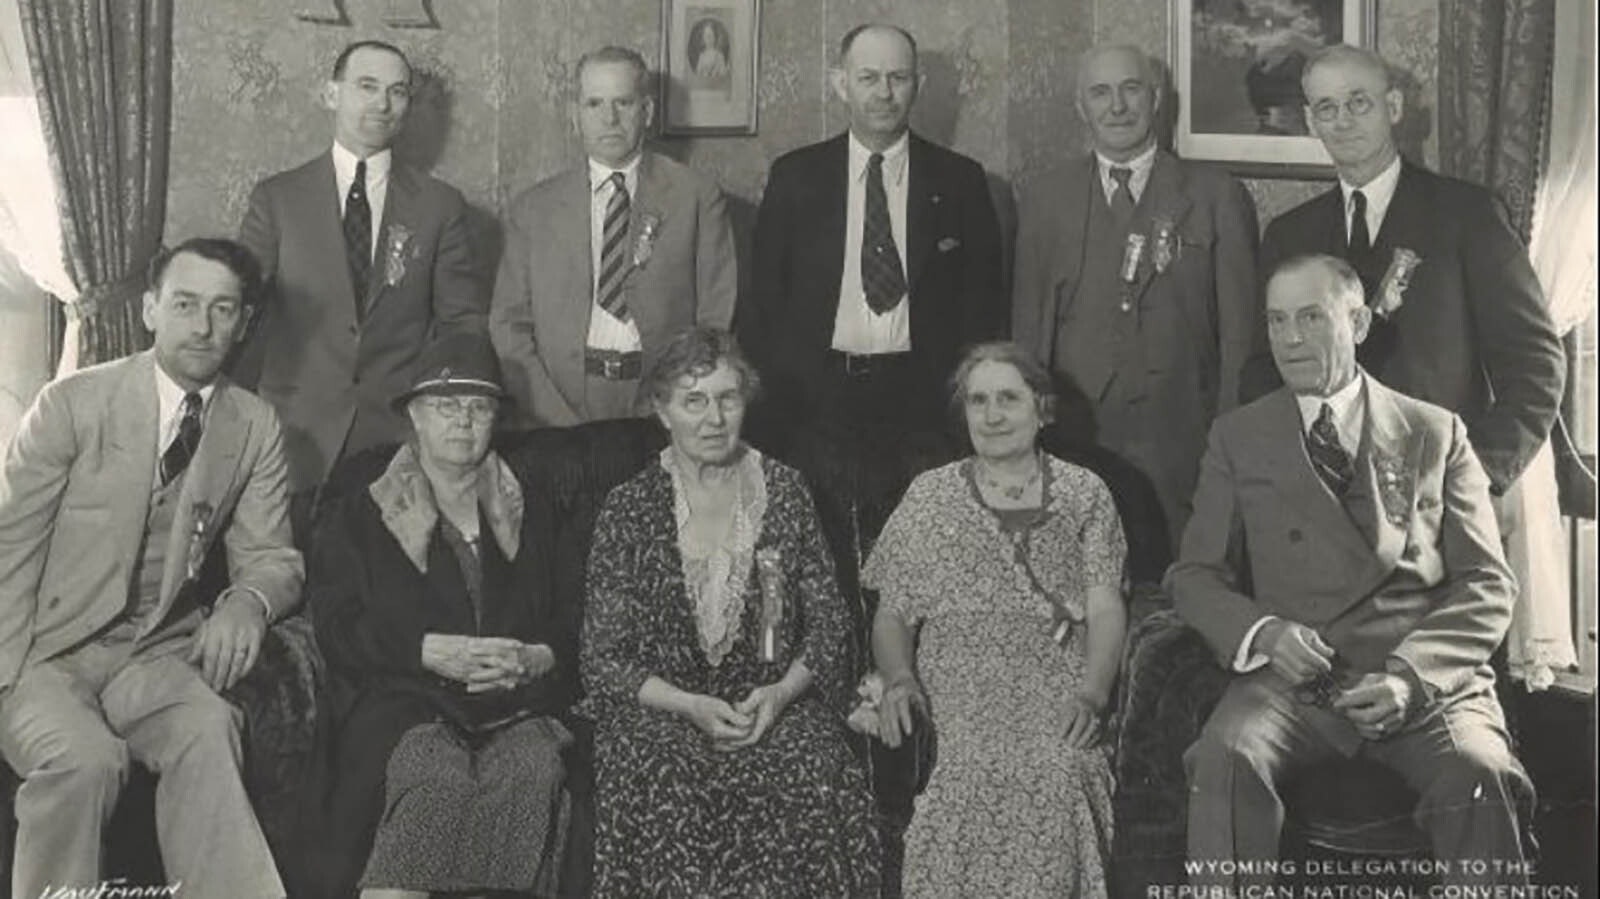 Dora McGrath was part of the Wyoming delegation to the 1932 Republican National Convention in Chicago, Illinois. She's seated second from right.